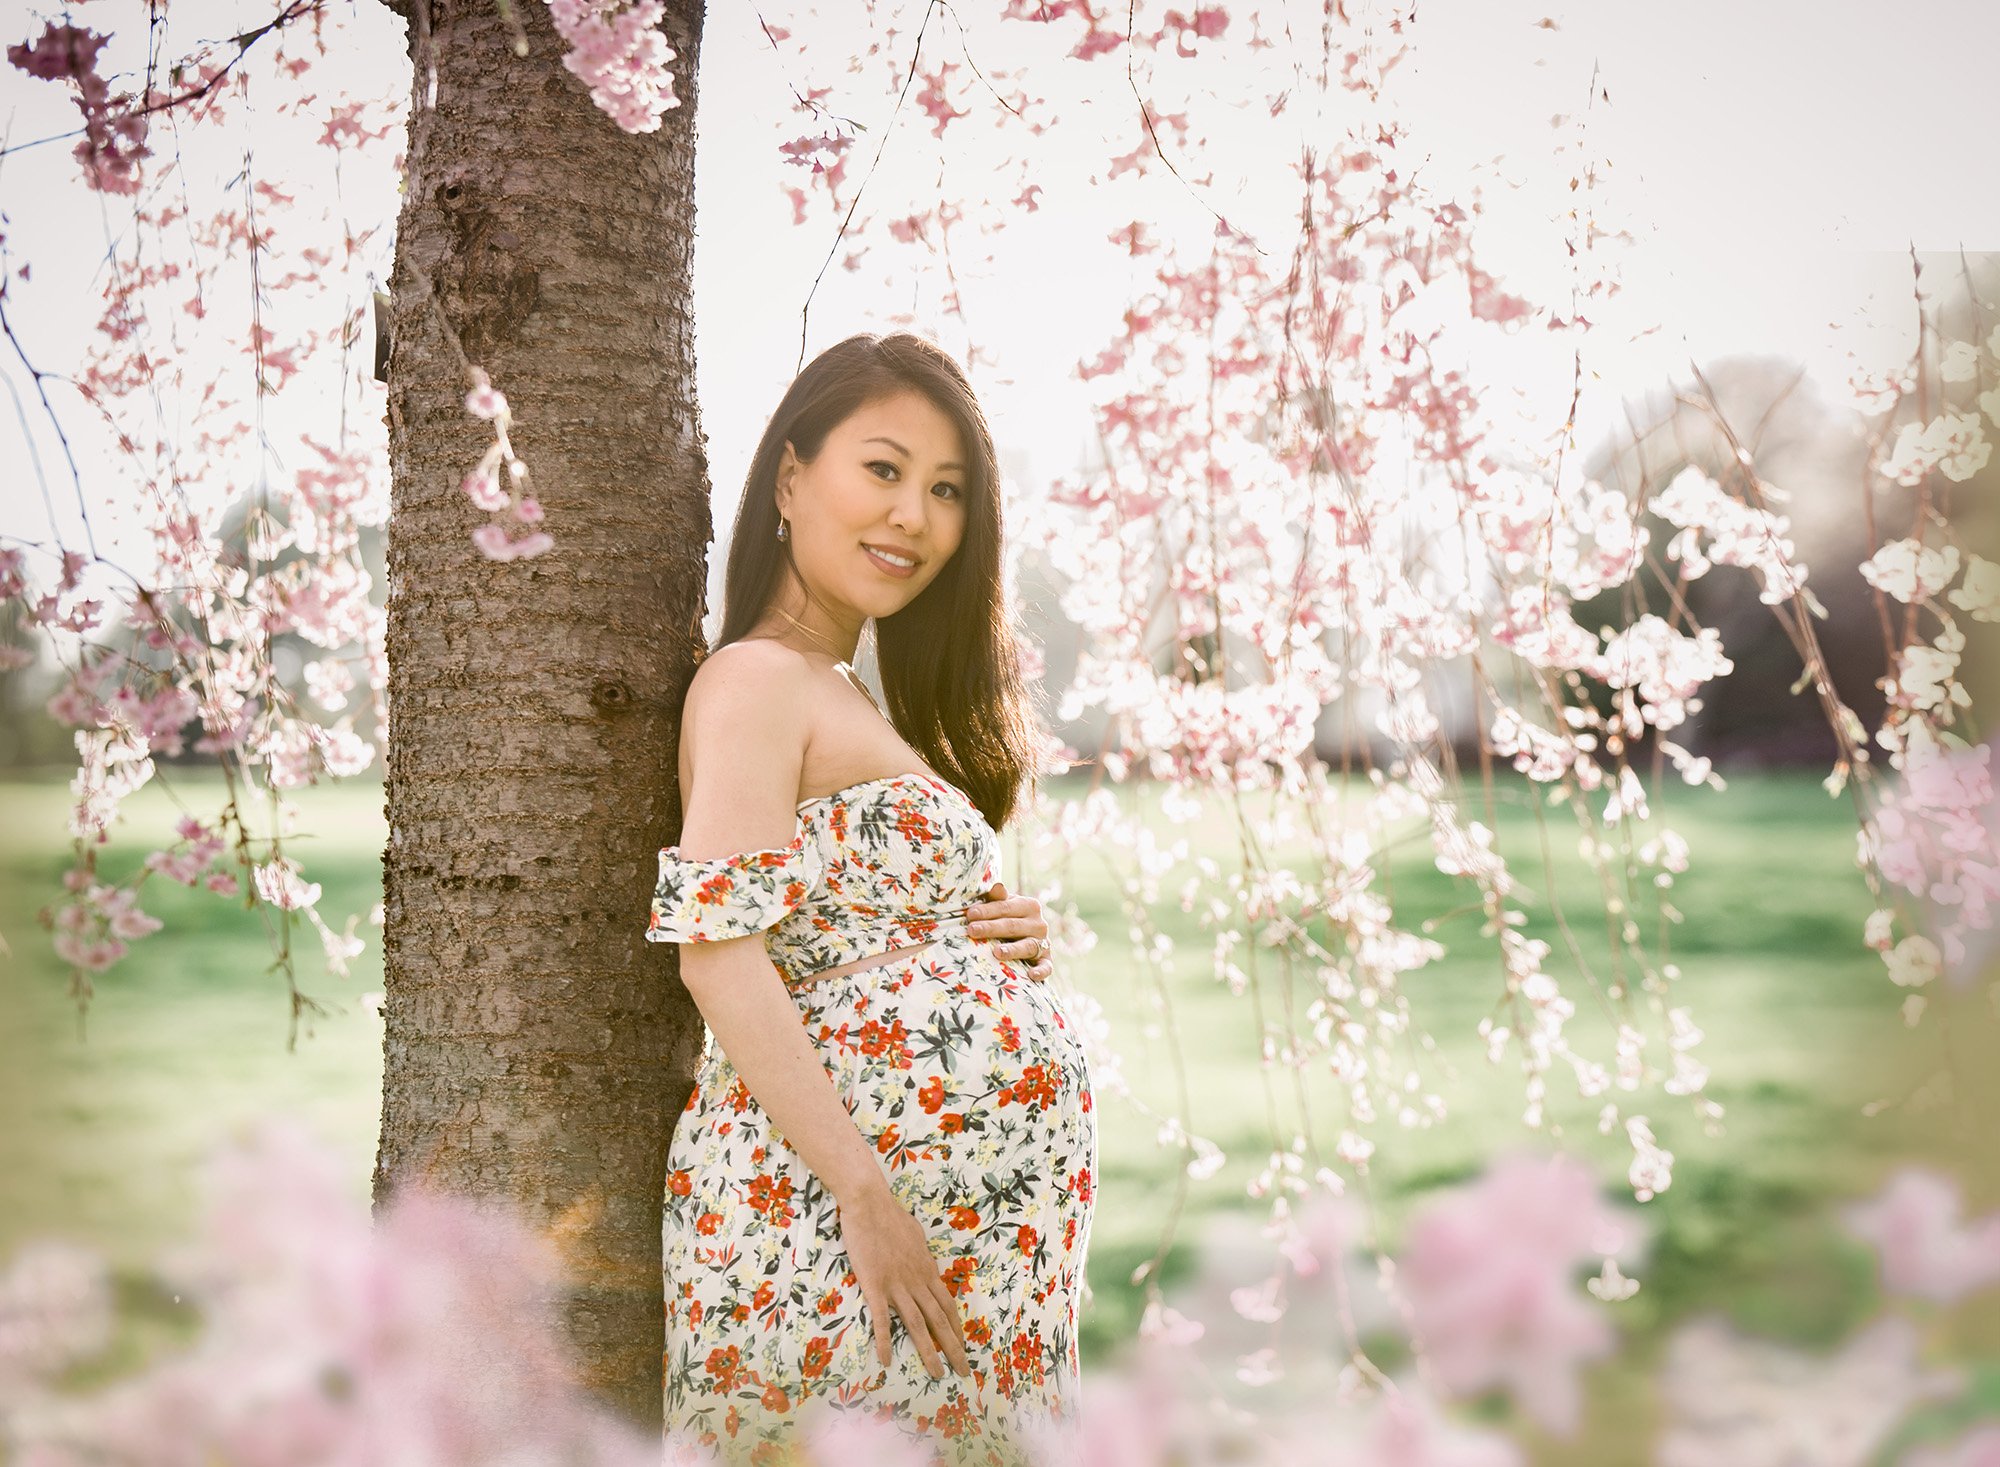 garden flower maternity photos pregnant woman in floral maternity dress standing under a weeping cherry tree